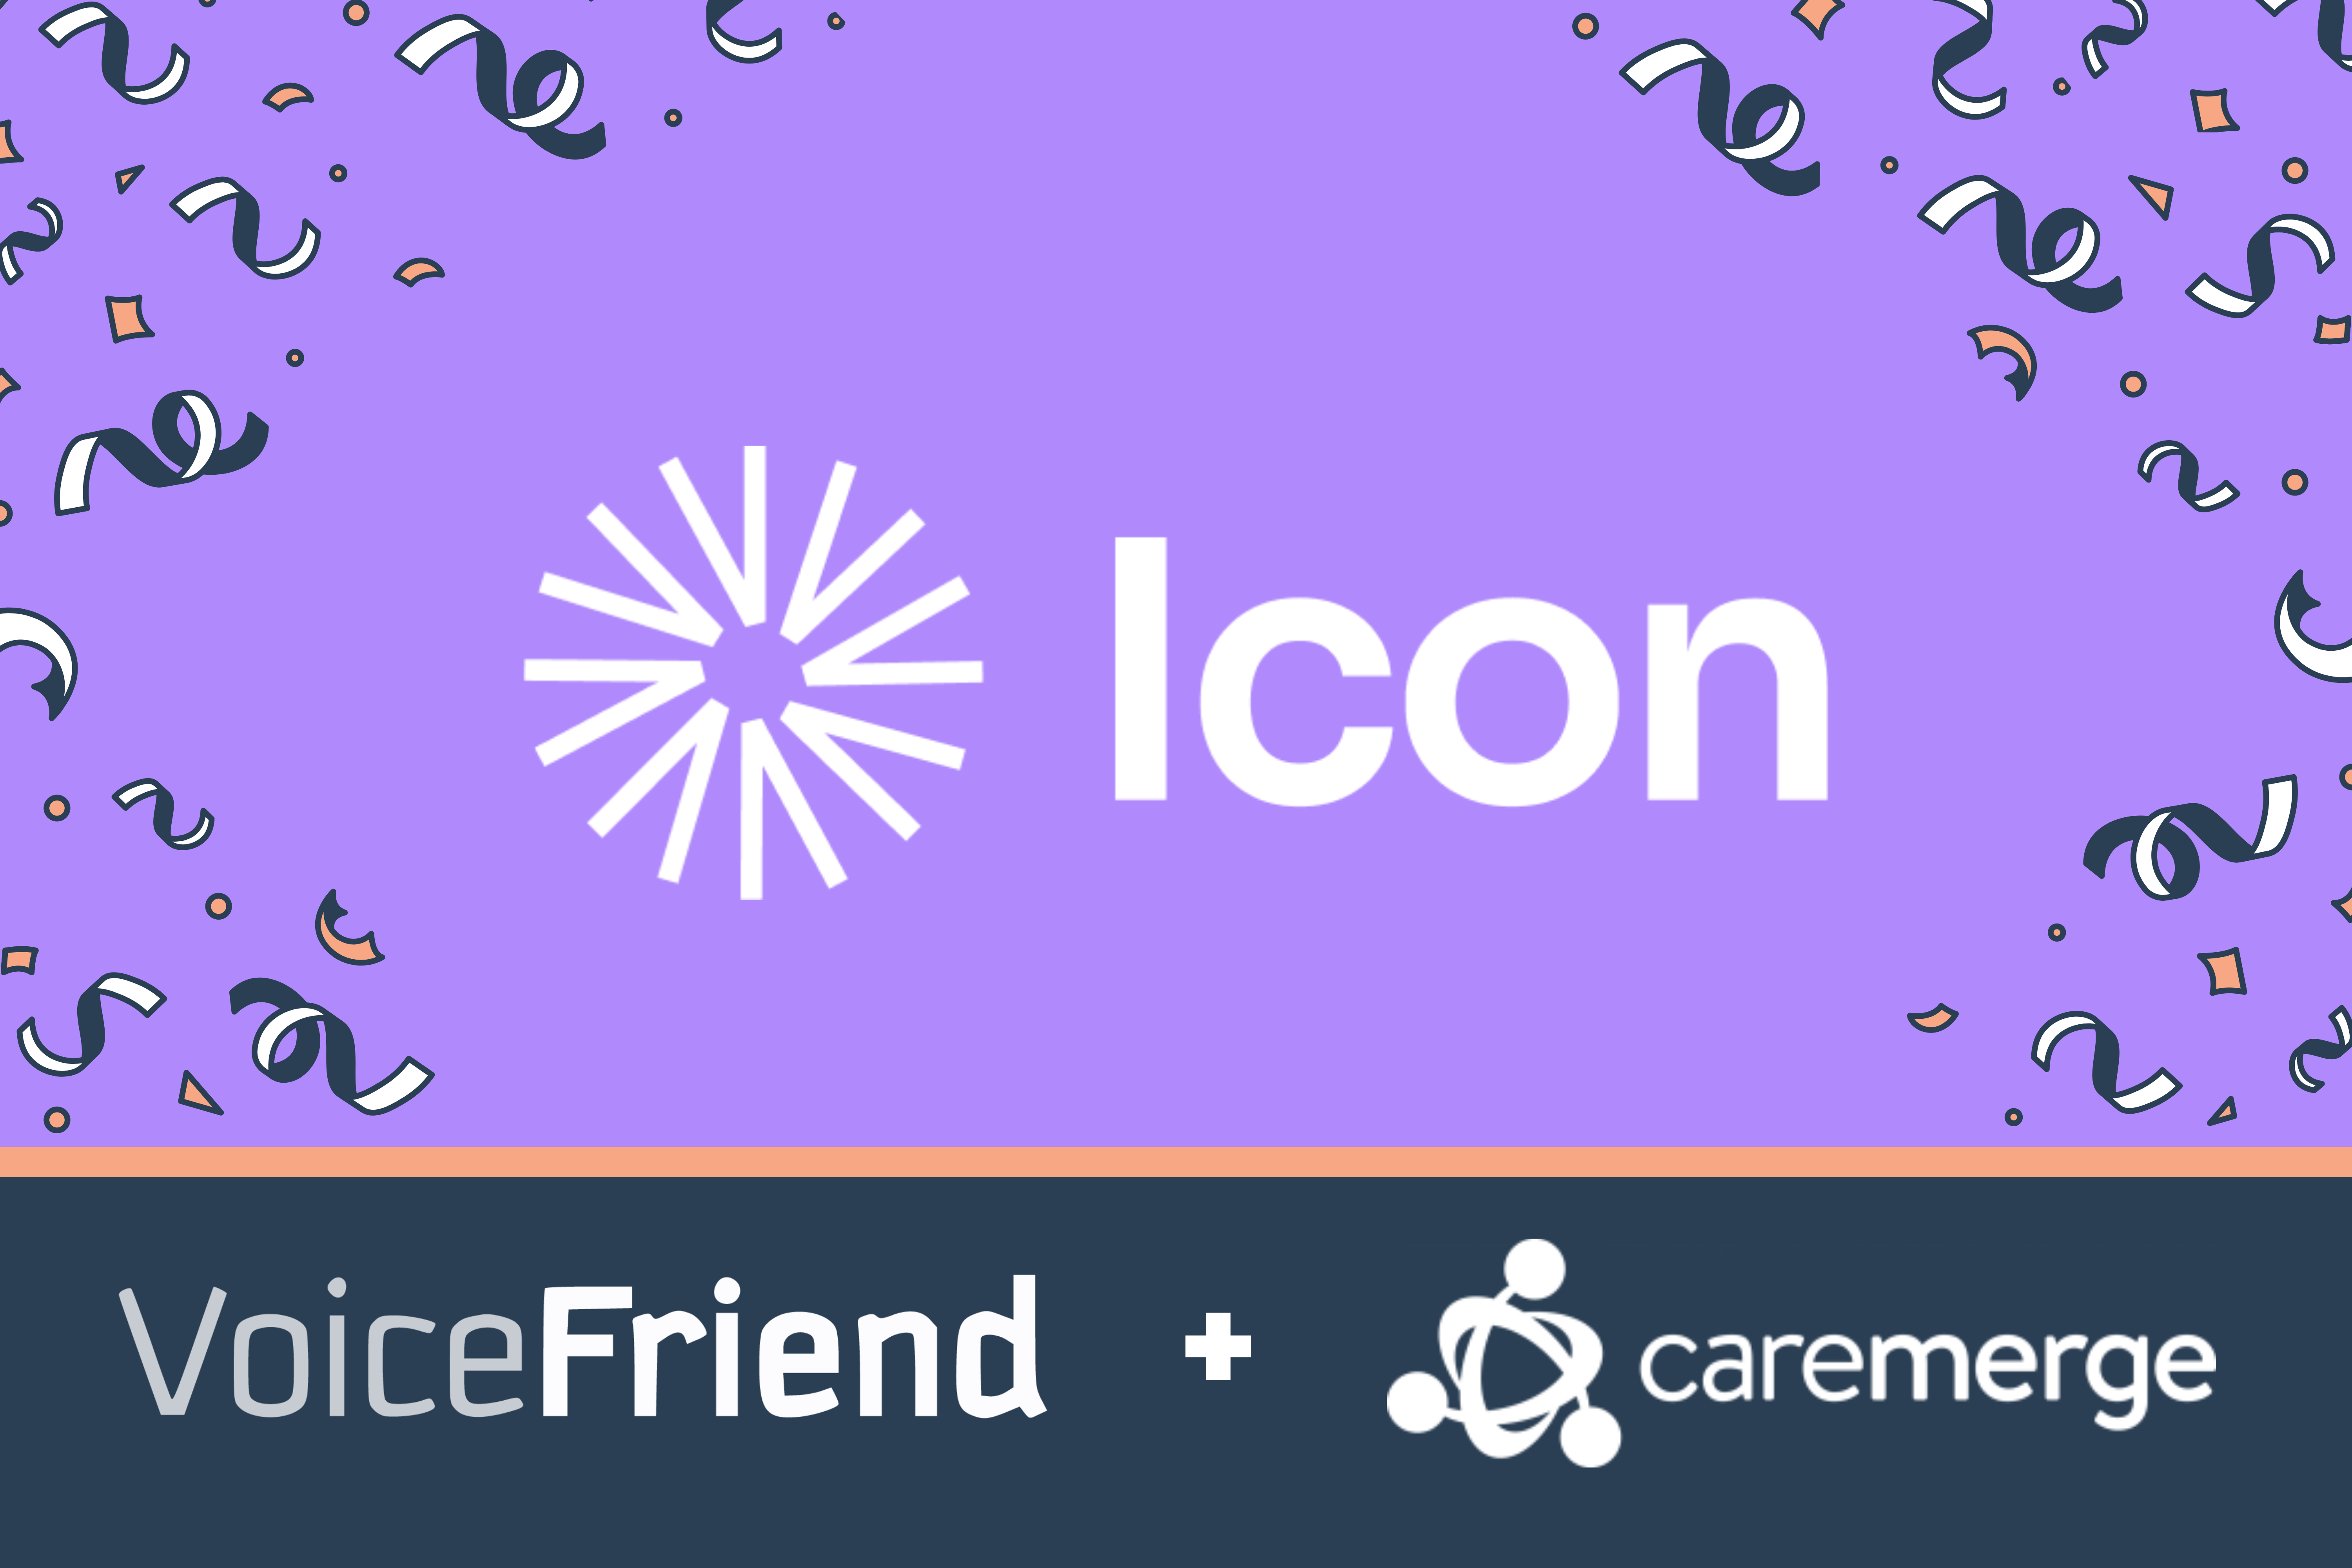 Introducing Icon – VoiceFriend and Caremerge Unite to Offer the Most Fully Integrated Communication and Engagement Platform